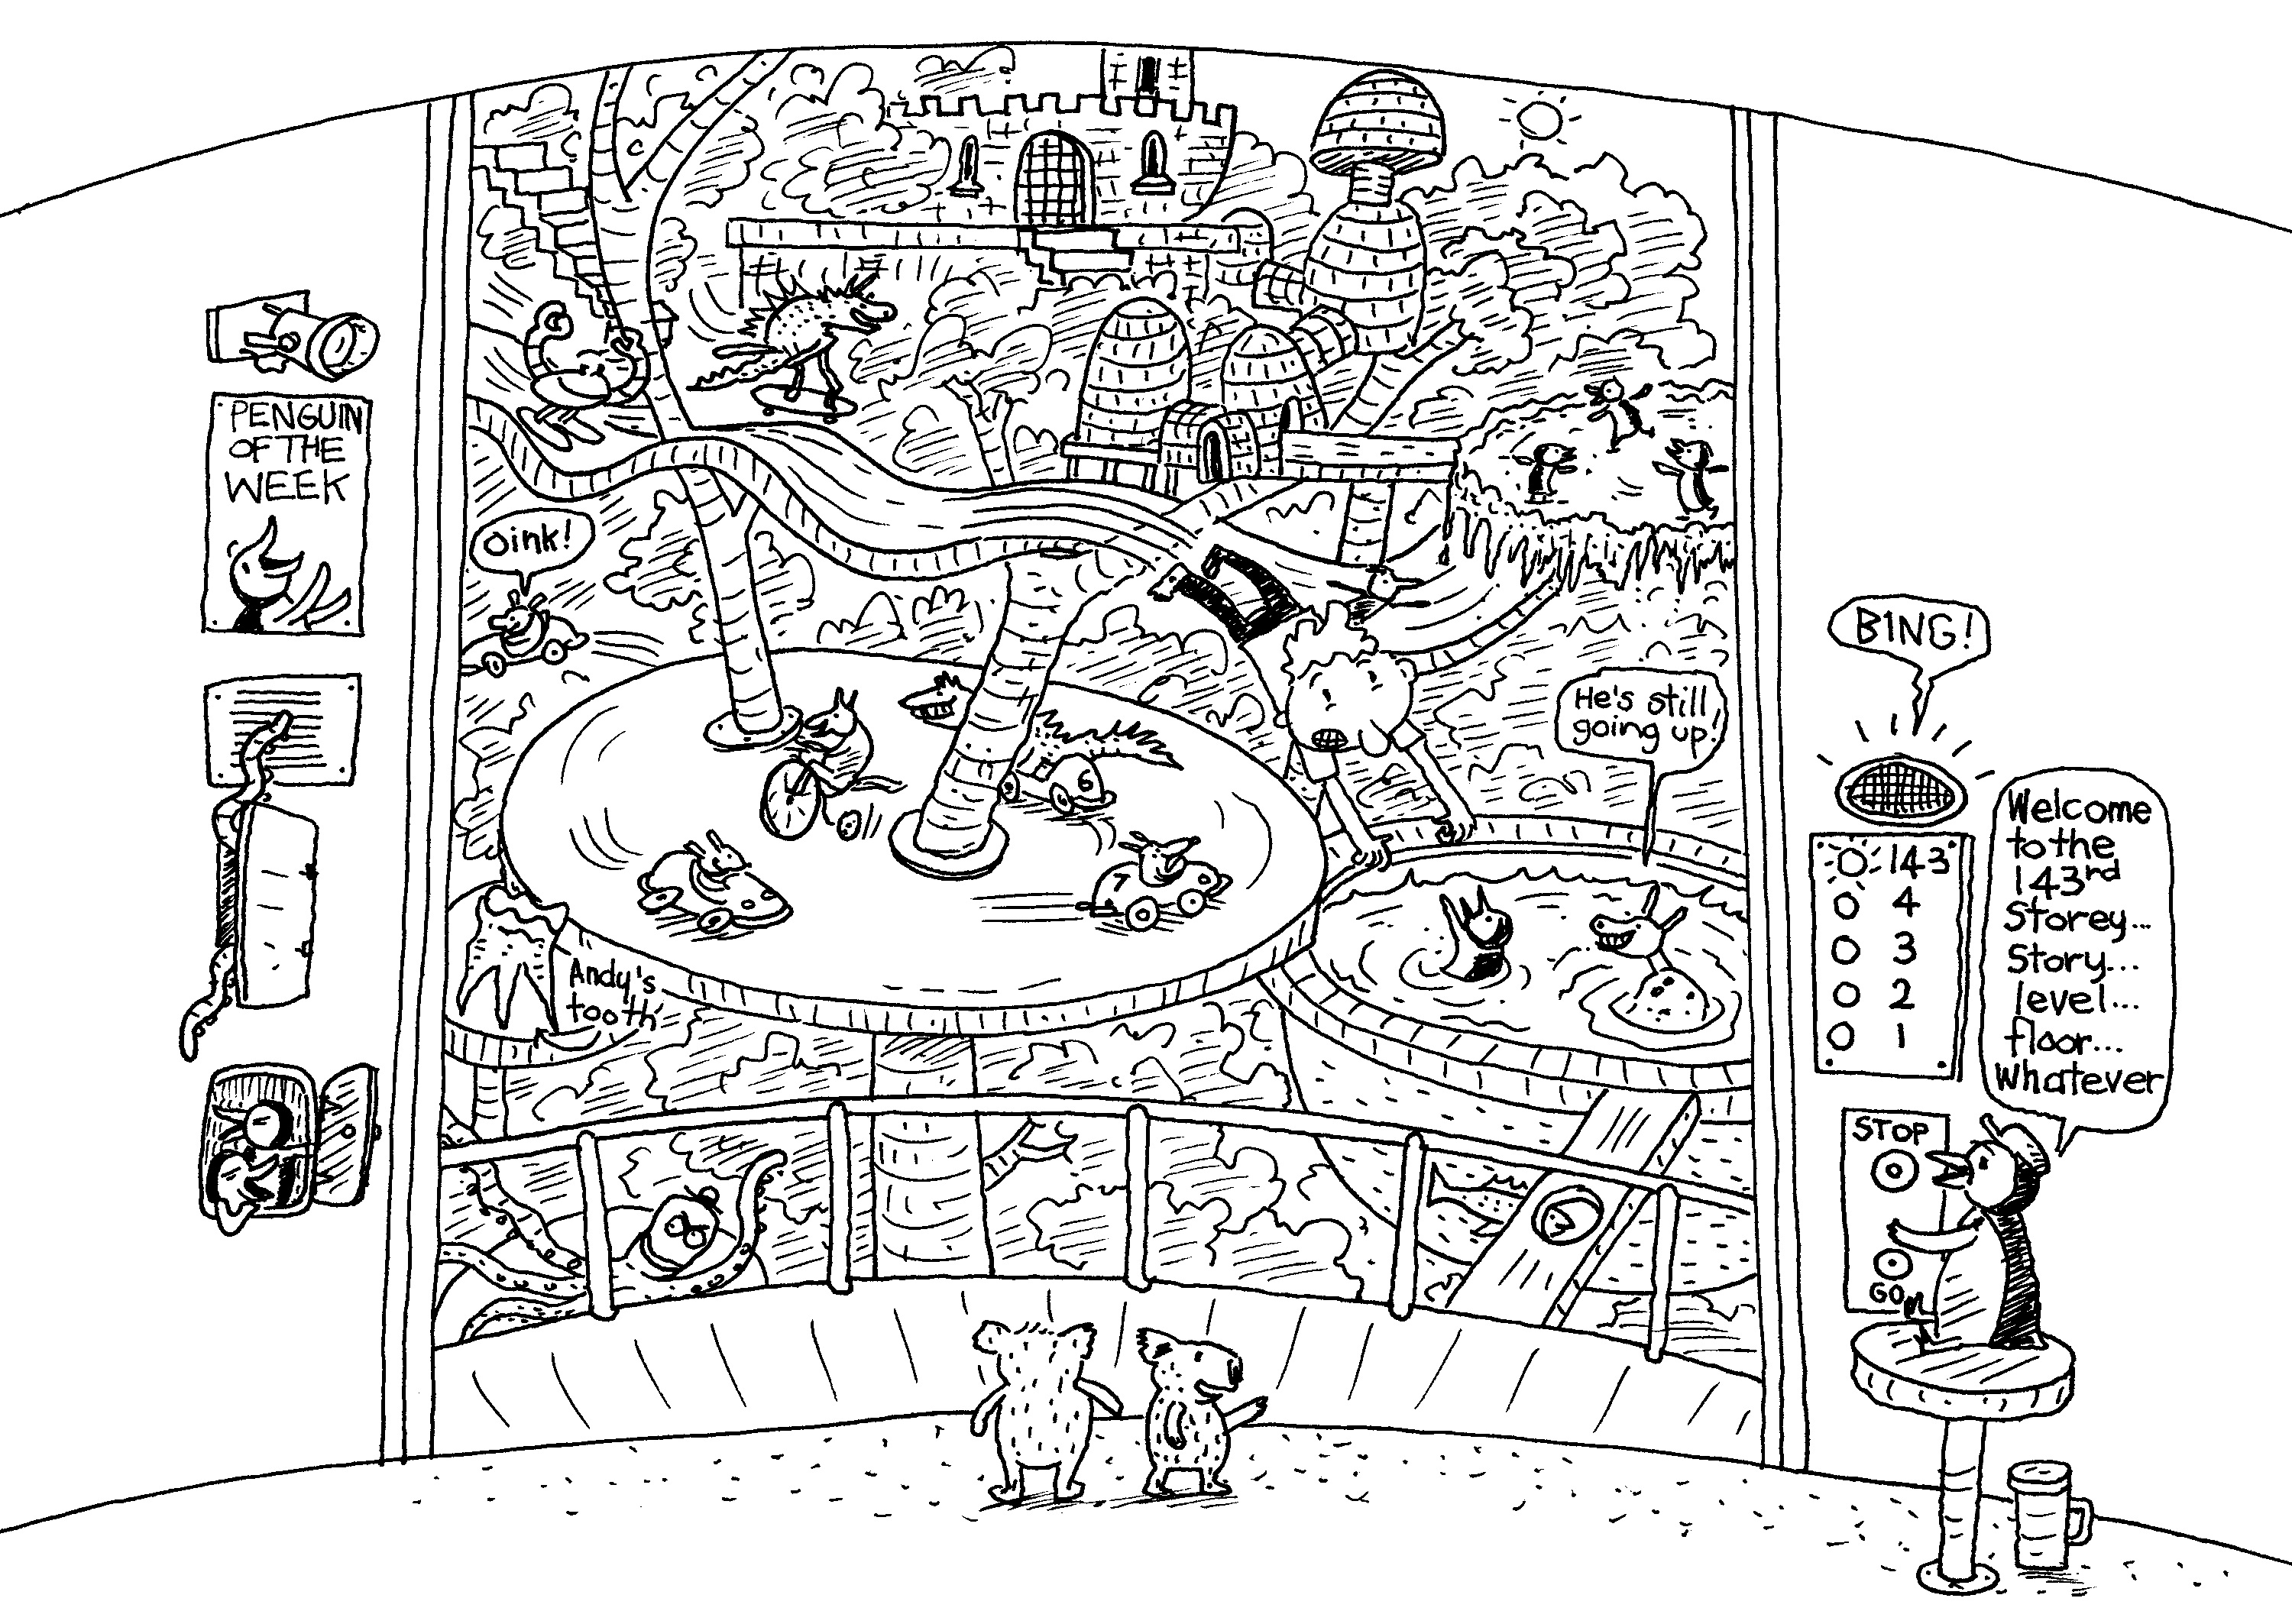 An elaborate black and white illustration of a treehouse filled with penguins, koalas and other animals running around